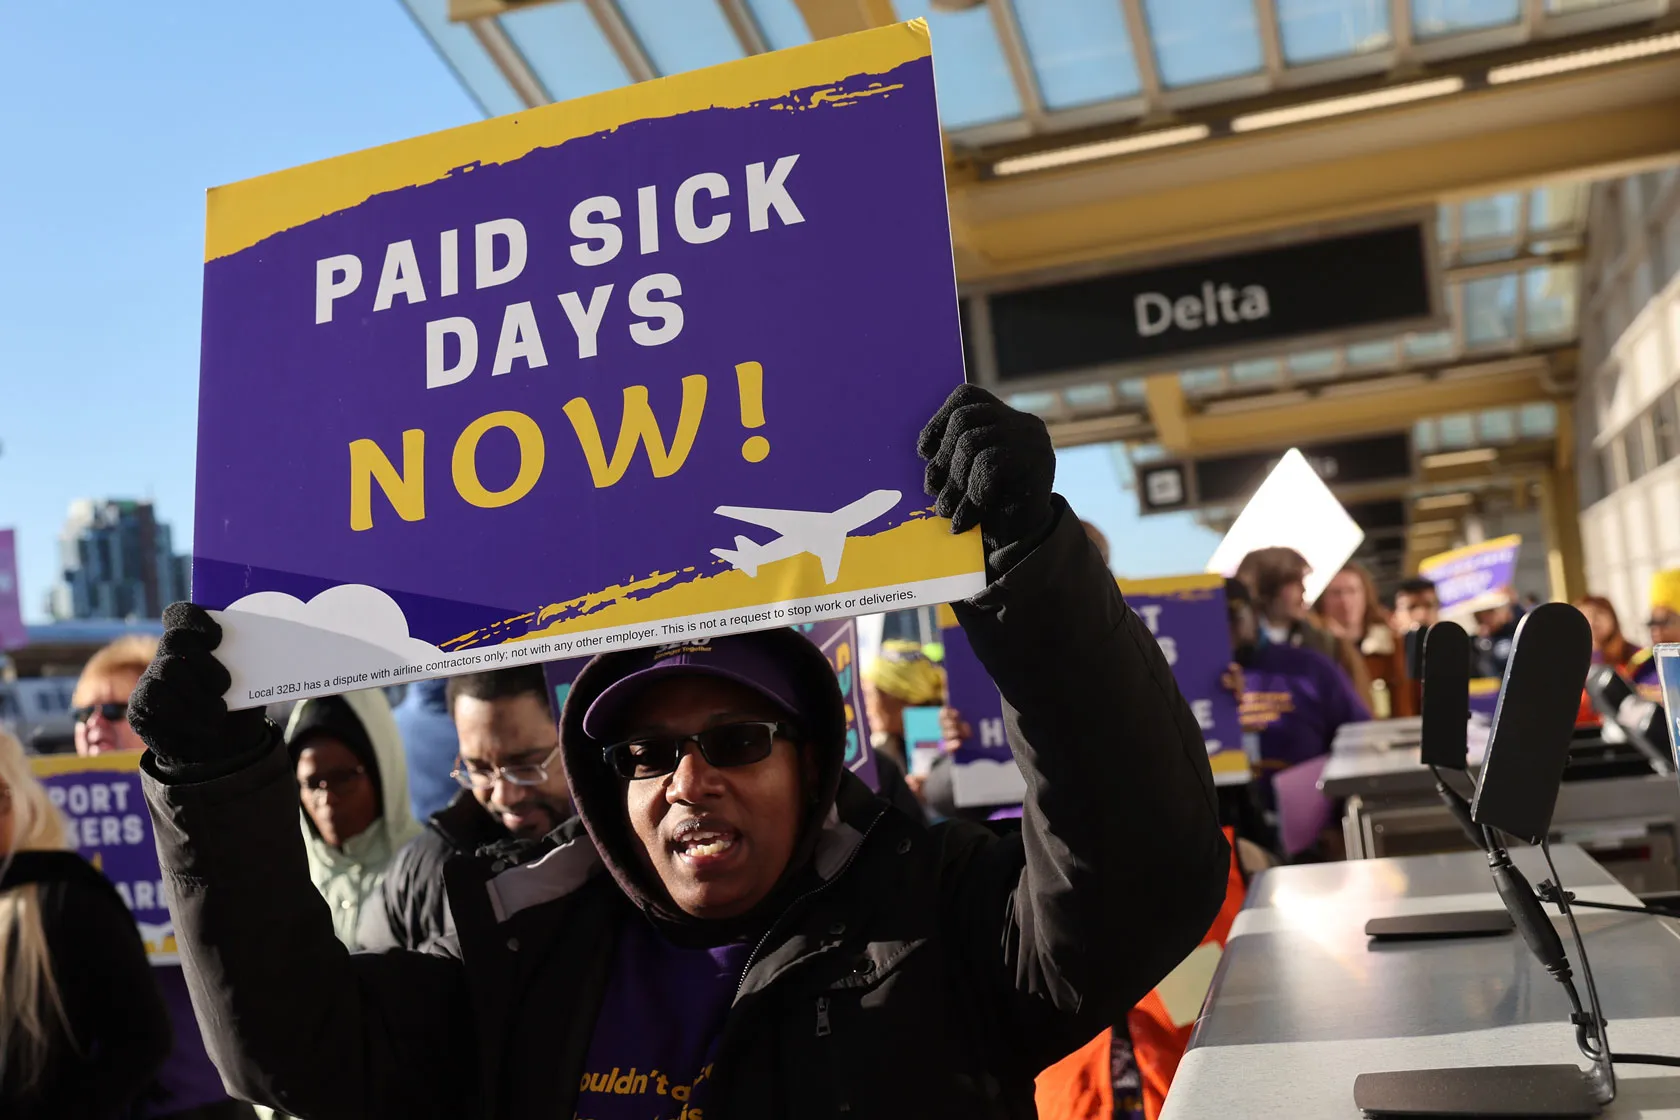 Workers hold signs in favor of paid sick days.